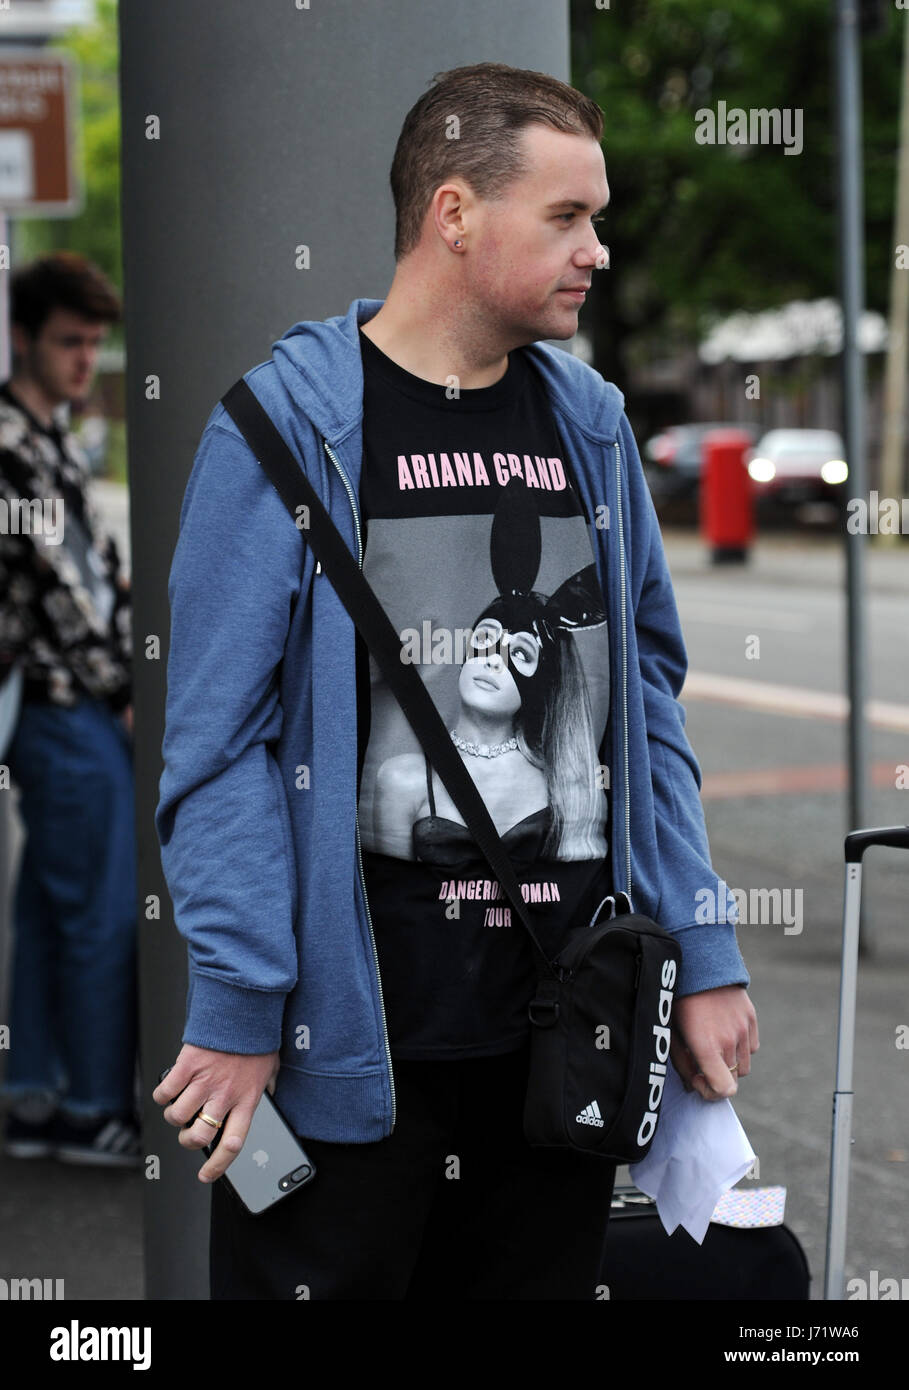 Manchester, UK. 23rd May, 2017. The scene outside the Manchester Arena, Manchester UK,  the morning after a suspected terrorist attack killed 22 people including children and injured 59 others at a concert by the pop star Ariana Grande. A concert goer waits to go home. Picture by Paul Heyes, Monday May 22, 2017. Credit: Paul Heyes/Alamy Live News Credit: Paul Heyes/Alamy Live News Stock Photo